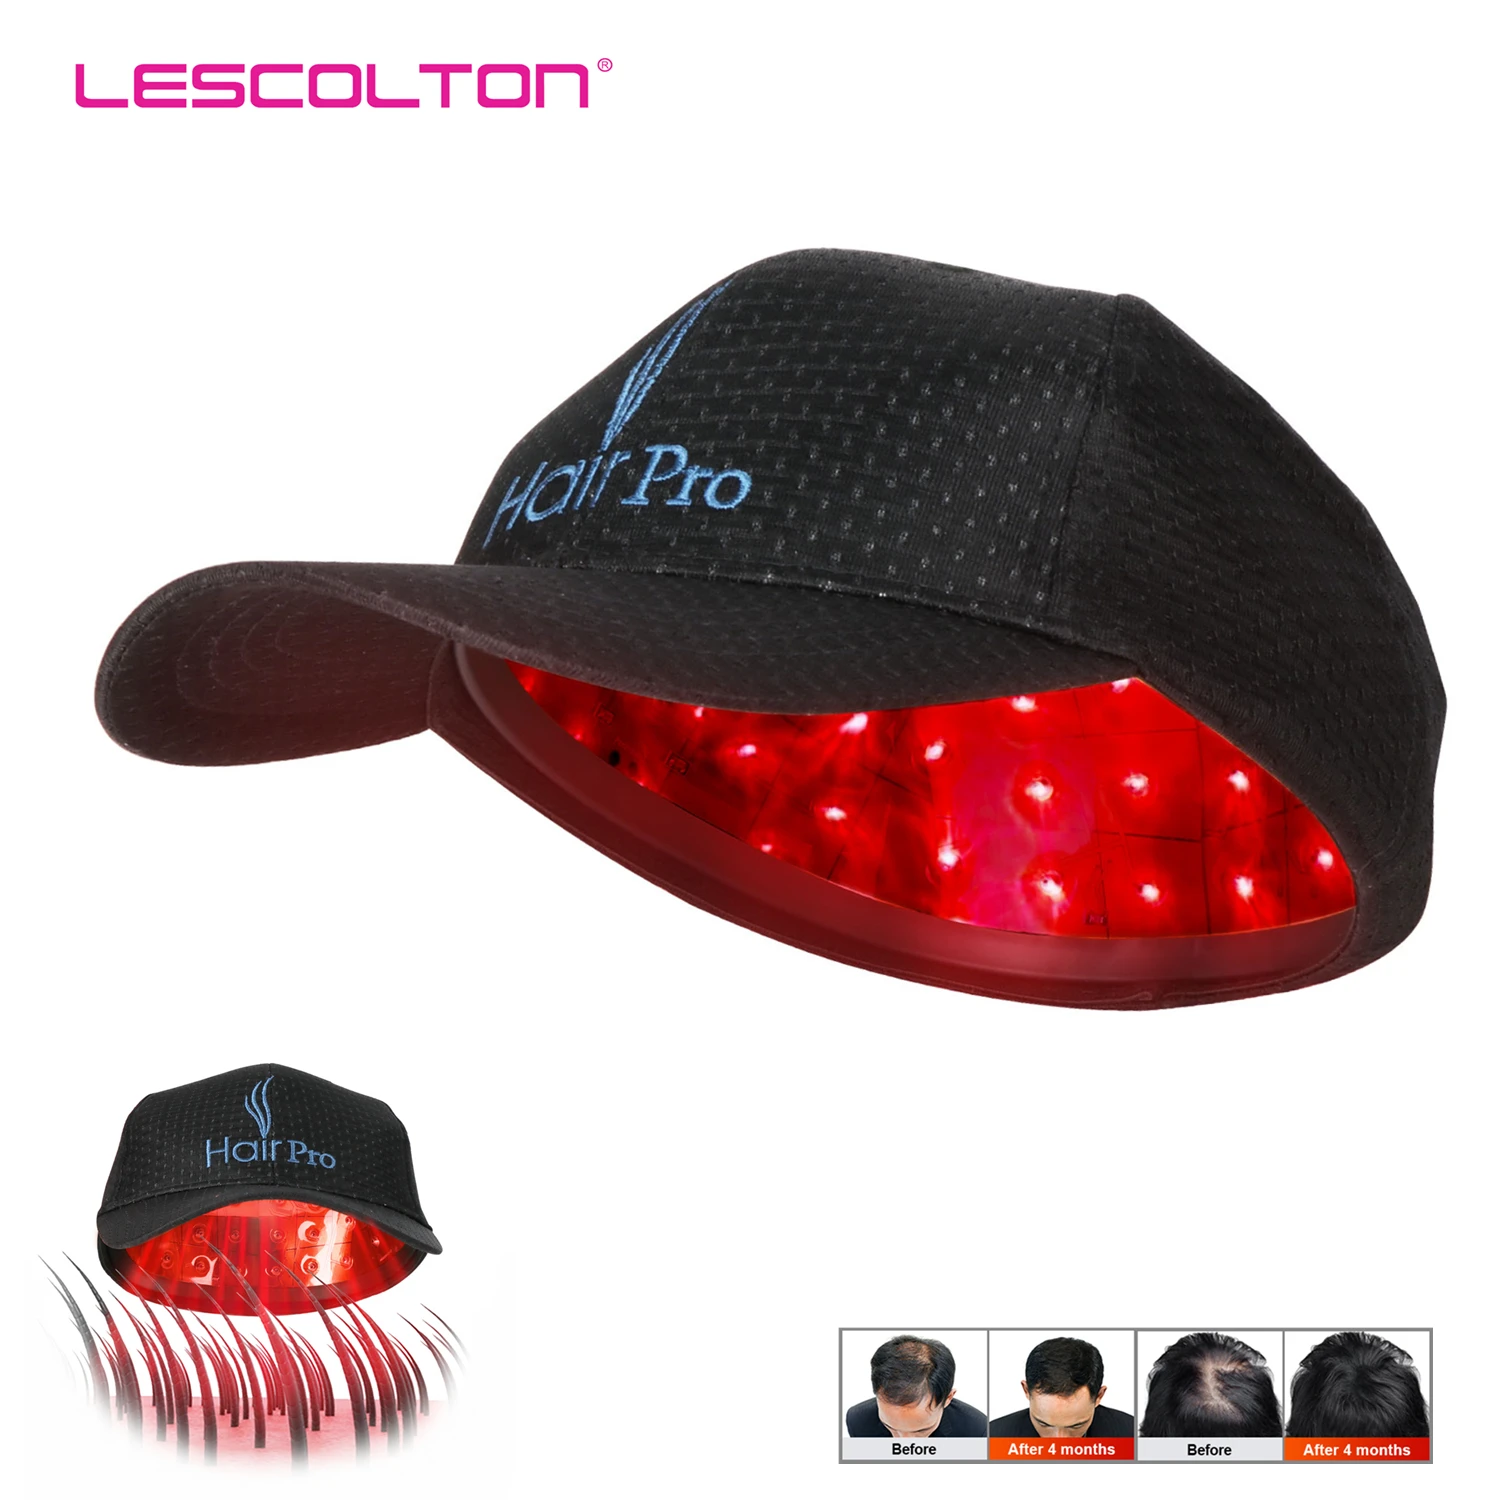 Laser Hair Growth Cap Lllt Therapy 81 Diodes Anti Hair Loss Treatment  Promote Hair Regrowth Device Hair Restore Product Man - Hair Growth Devices  - AliExpress